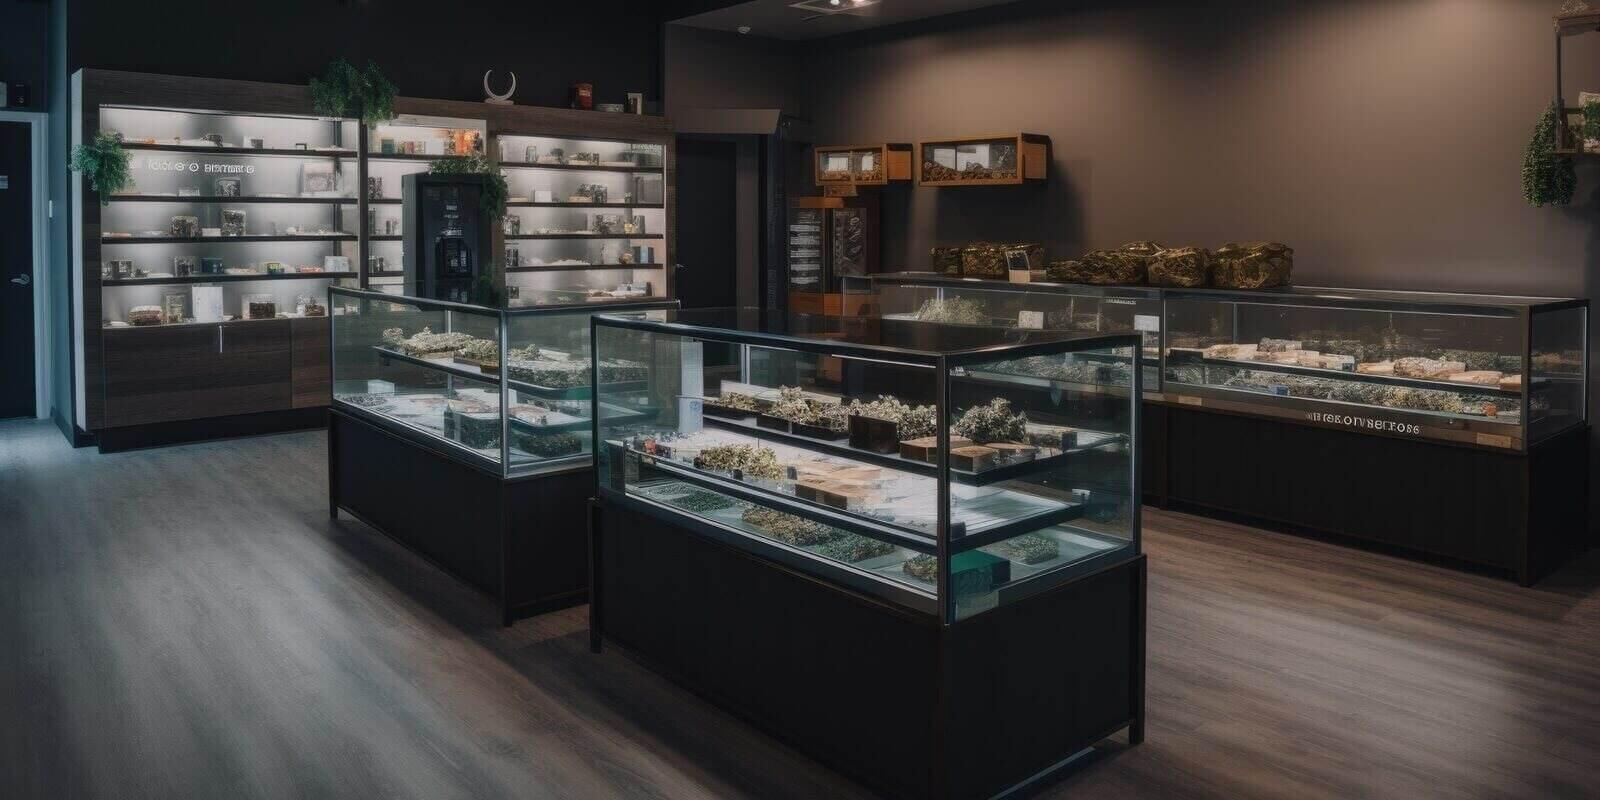 Boston marijuana dispensary, with variety of cannabis products and accessories